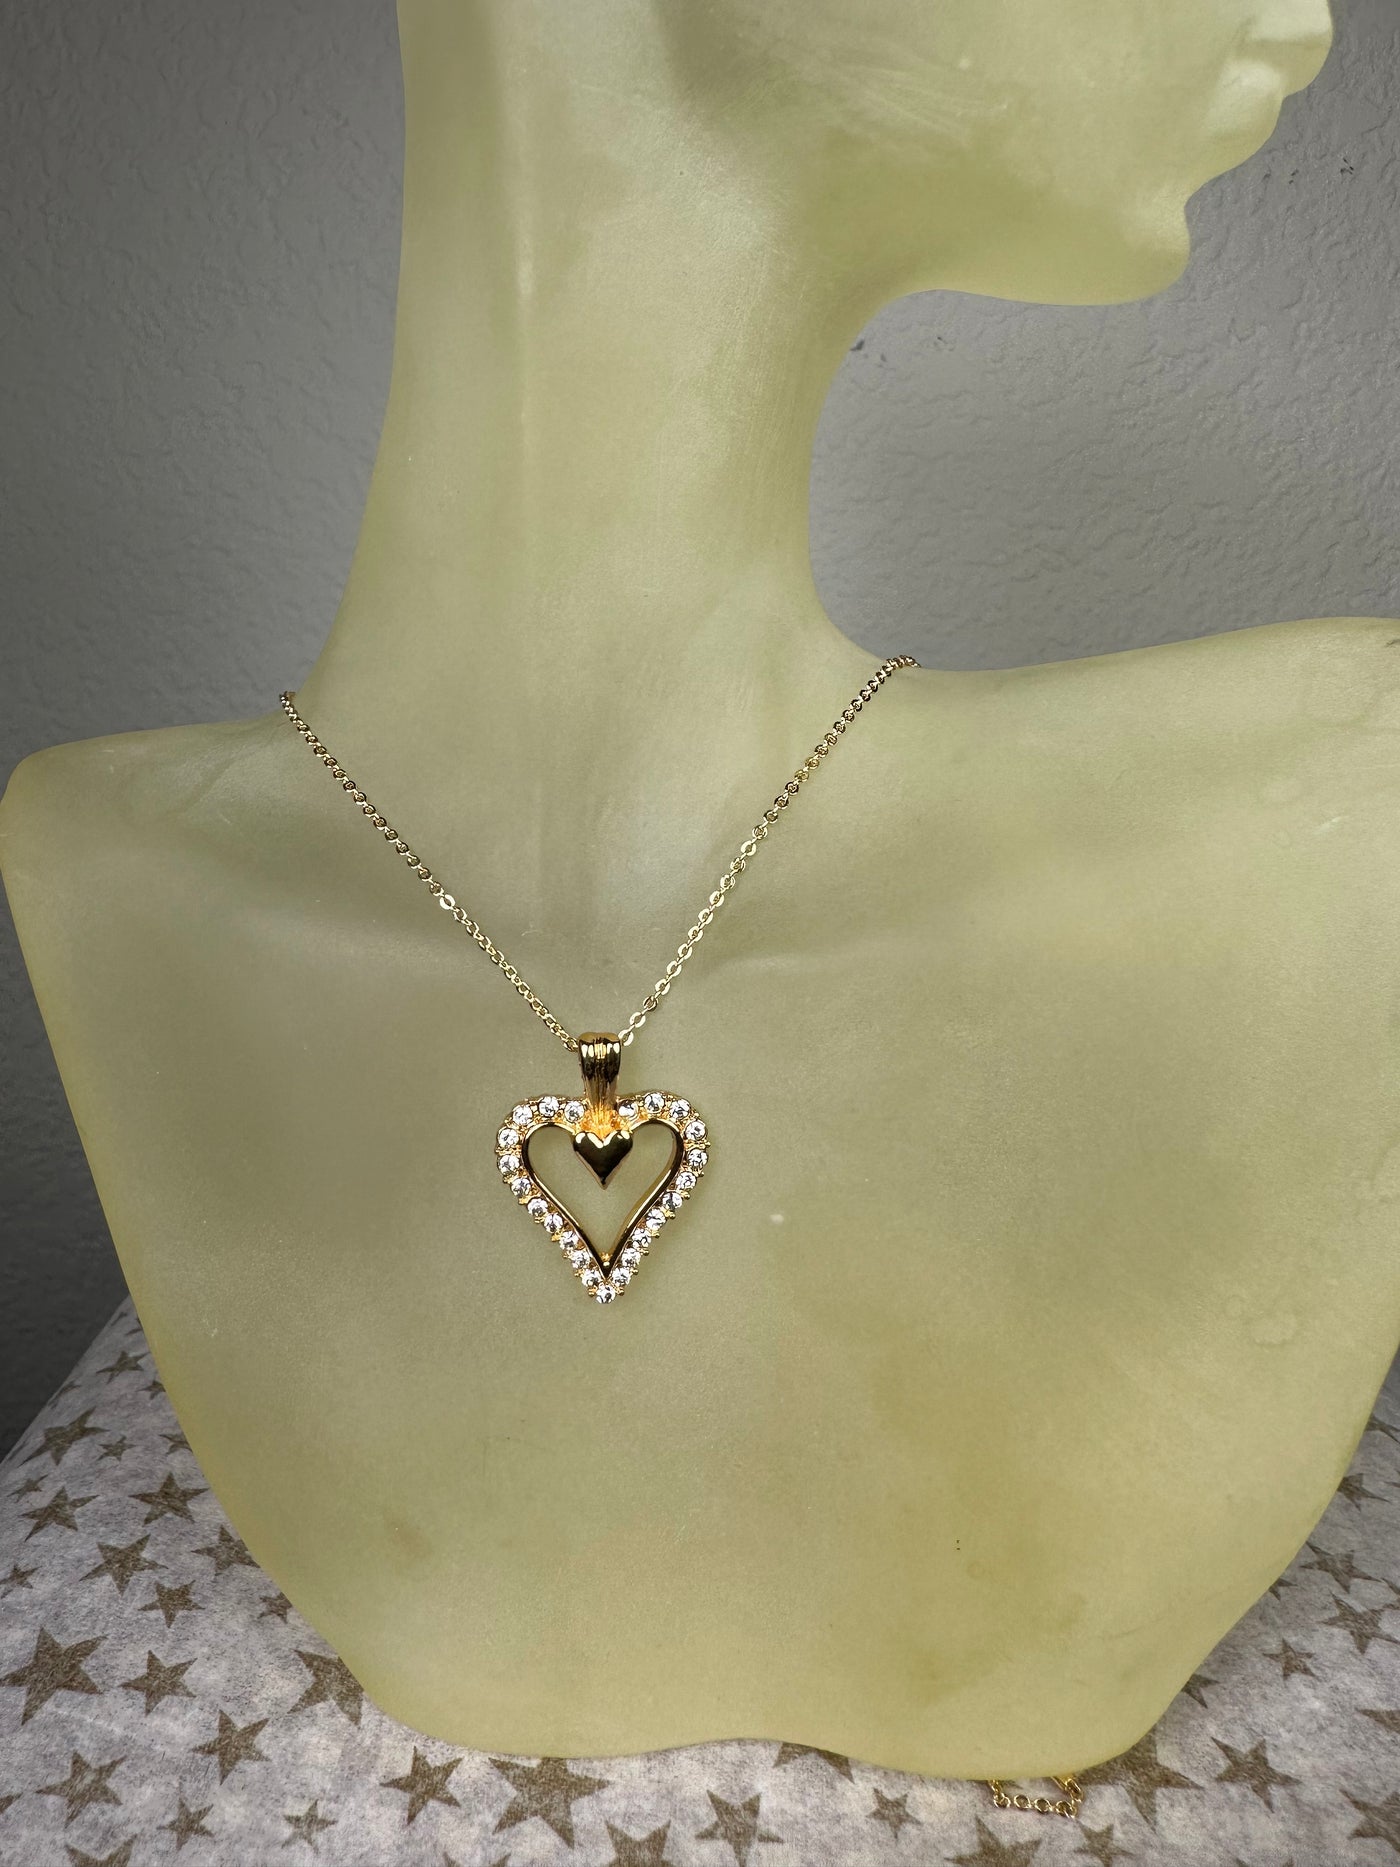 Gold Tone Crystal Heart Pendant and Chain Necklace